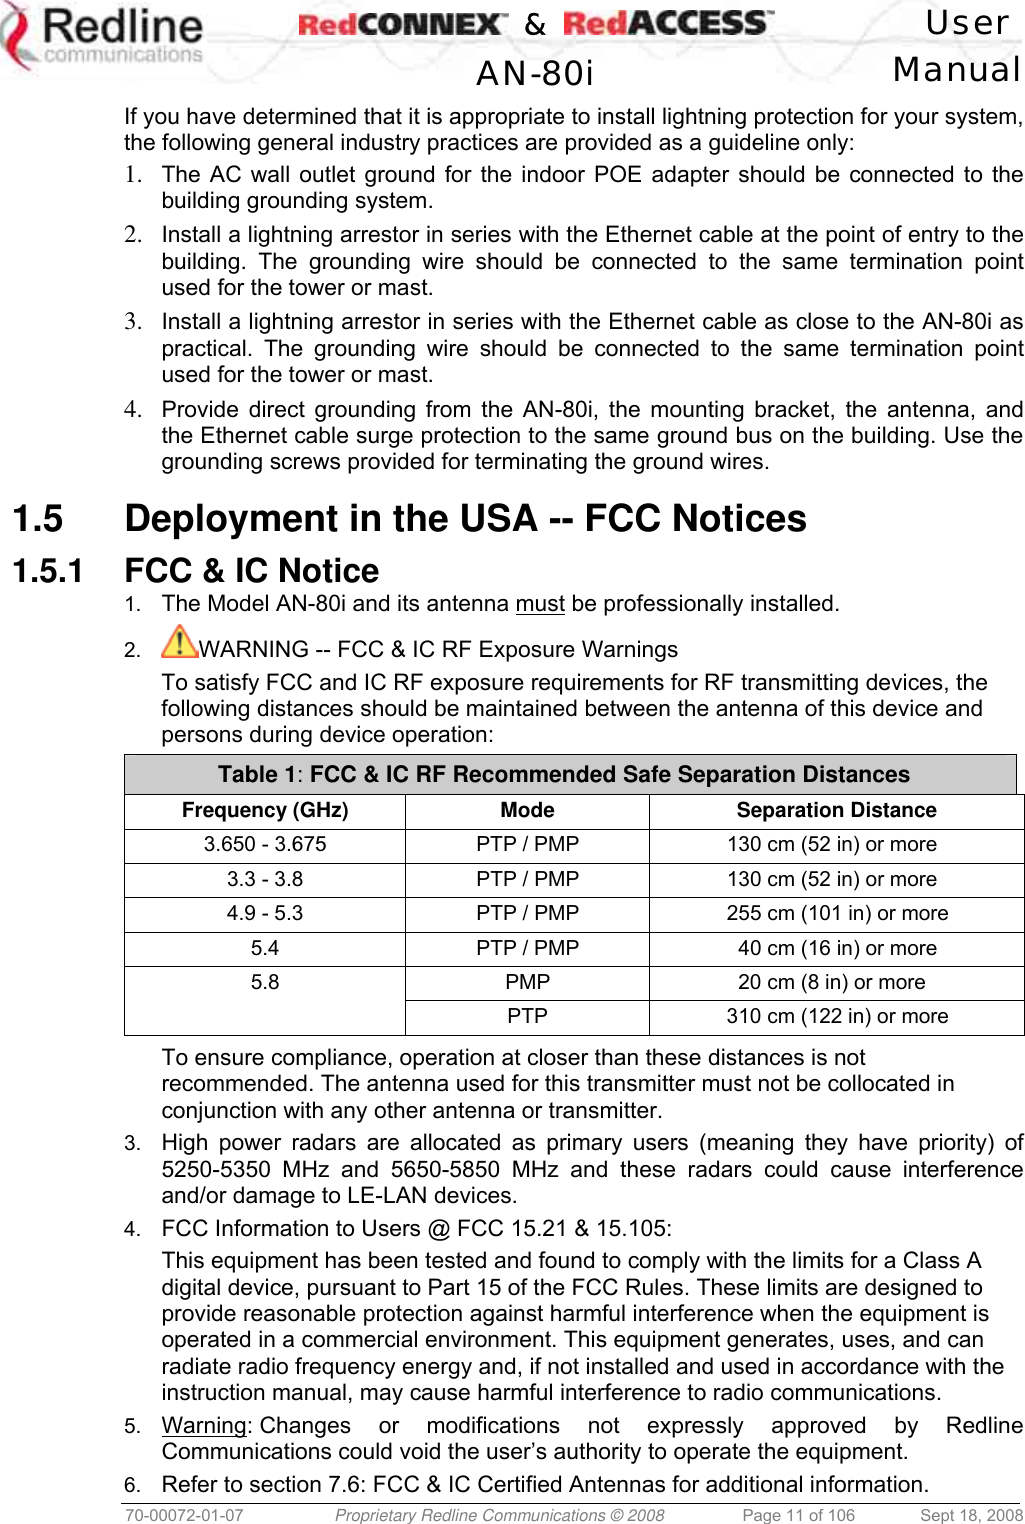    &amp;  User  AN-80i Manual  70-00072-01-07  Proprietary Redline Communications © 2008  Page 11 of 106  Sept 18, 2008 If you have determined that it is appropriate to install lightning protection for your system, the following general industry practices are provided as a guideline only: 1.  The AC wall outlet ground for the indoor POE adapter should be connected to the building grounding system. 2.  Install a lightning arrestor in series with the Ethernet cable at the point of entry to the building. The grounding wire should be connected to the same termination point used for the tower or mast. 3.  Install a lightning arrestor in series with the Ethernet cable as close to the AN-80i as practical. The grounding wire should be connected to the same termination point used for the tower or mast. 4.  Provide direct grounding from the AN-80i, the mounting bracket, the antenna, and the Ethernet cable surge protection to the same ground bus on the building. Use the grounding screws provided for terminating the ground wires.  1.5  Deployment in the USA -- FCC Notices 1.5.1  FCC &amp; IC Notice 1.  The Model AN-80i and its antenna must be professionally installed. 2.  WARNING -- FCC &amp; IC RF Exposure Warnings To satisfy FCC and IC RF exposure requirements for RF transmitting devices, the following distances should be maintained between the antenna of this device and persons during device operation: Table 1: FCC &amp; IC RF Recommended Safe Separation Distances  Frequency (GHz)  Mode Separation Distance 3.650 - 3.675 PTP / PMP 130 cm (52 in) or more 3.3 - 3.8  PTP / PMP  130 cm (52 in) or more 4.9 - 5.3  PTP / PMP  255 cm (101 in) or more 5.4  PTP / PMP  40 cm (16 in) or more 5.8  PMP  20 cm (8 in) or more   PTP  310 cm (122 in) or more  To ensure compliance, operation at closer than these distances is not recommended. The antenna used for this transmitter must not be collocated in conjunction with any other antenna or transmitter. 3.  High power radars are allocated as primary users (meaning they have priority) of 5250-5350 MHz and 5650-5850 MHz and these radars could cause interference and/or damage to LE-LAN devices. 4.  FCC Information to Users @ FCC 15.21 &amp; 15.105: This equipment has been tested and found to comply with the limits for a Class A digital device, pursuant to Part 15 of the FCC Rules. These limits are designed to provide reasonable protection against harmful interference when the equipment is operated in a commercial environment. This equipment generates, uses, and can radiate radio frequency energy and, if not installed and used in accordance with the instruction manual, may cause harmful interference to radio communications. 5.  Warning: Changes or modifications not expressly approved by Redline Communications could void the user’s authority to operate the equipment. 6.  Refer to section 7.6: FCC &amp; IC Certified Antennas for additional information. 